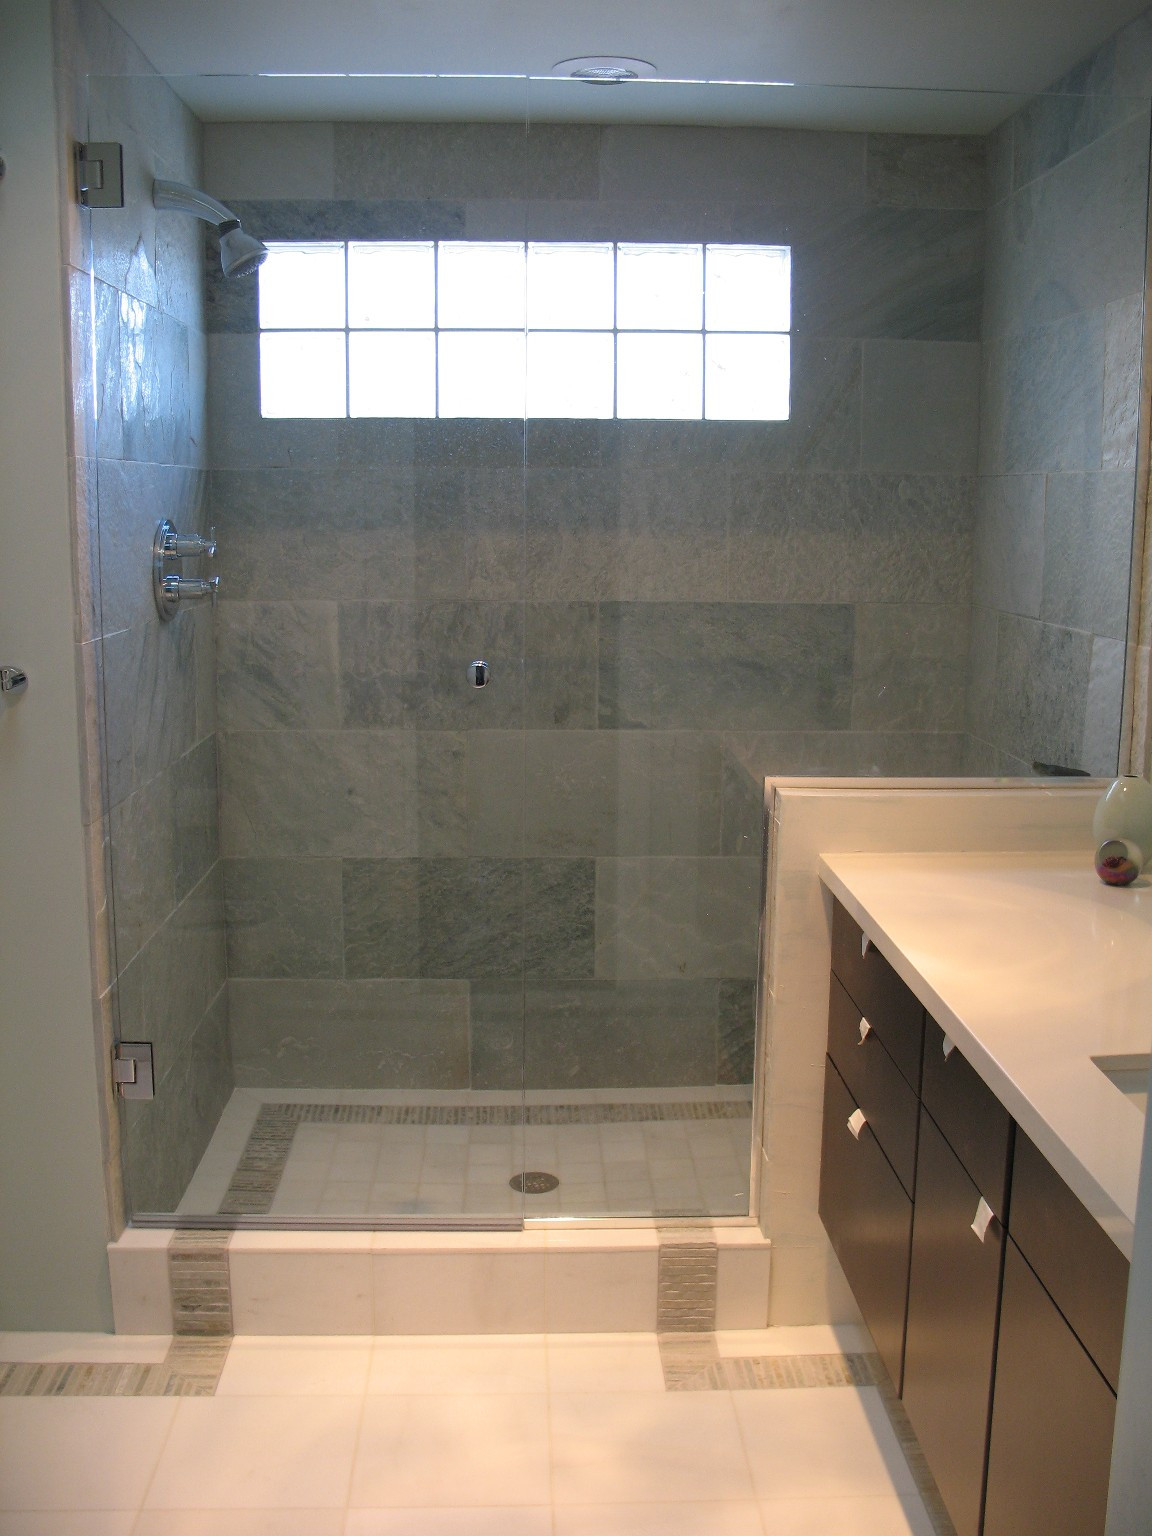 Bathroom Shower Tile Ideas
 33 amazing ideas and pictures of modern bathroom shower